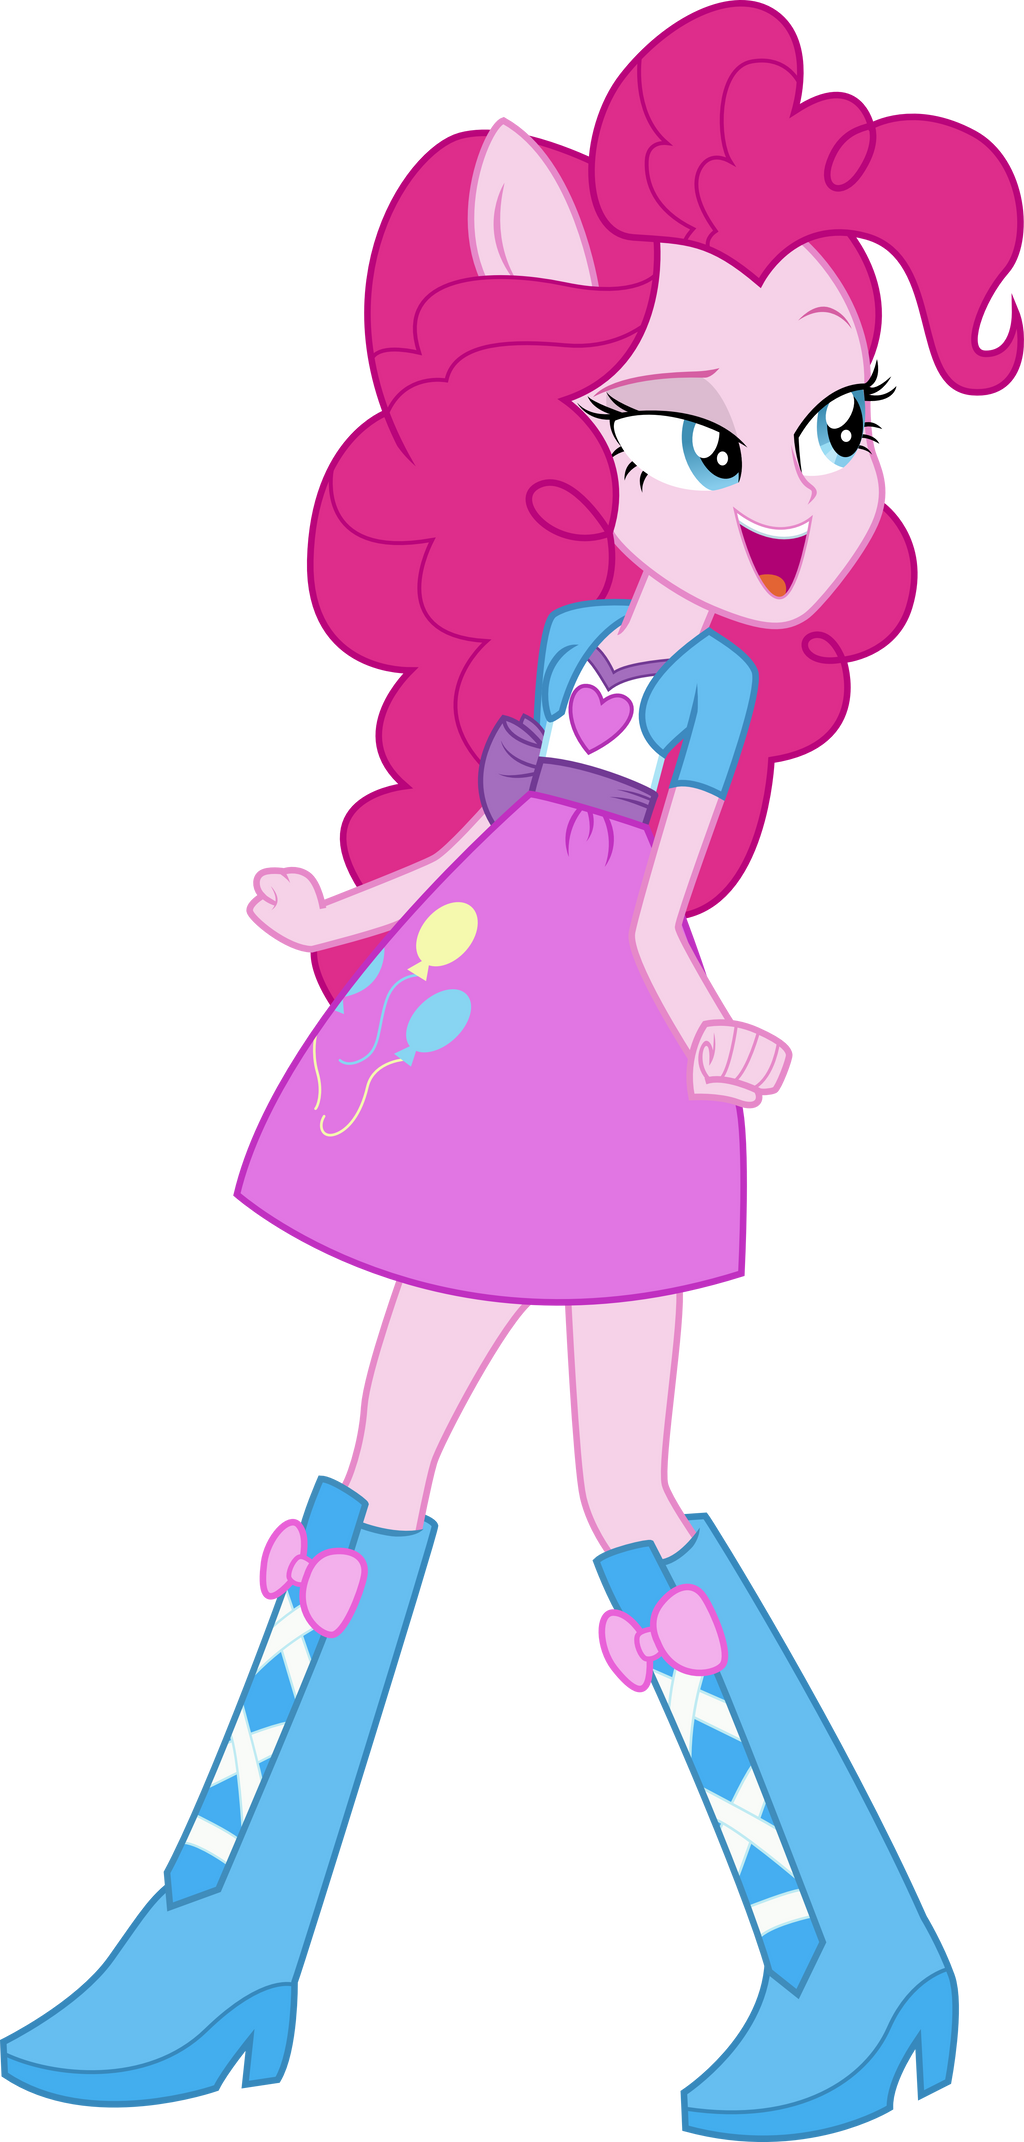 Image result for pinkie pie equestria girl